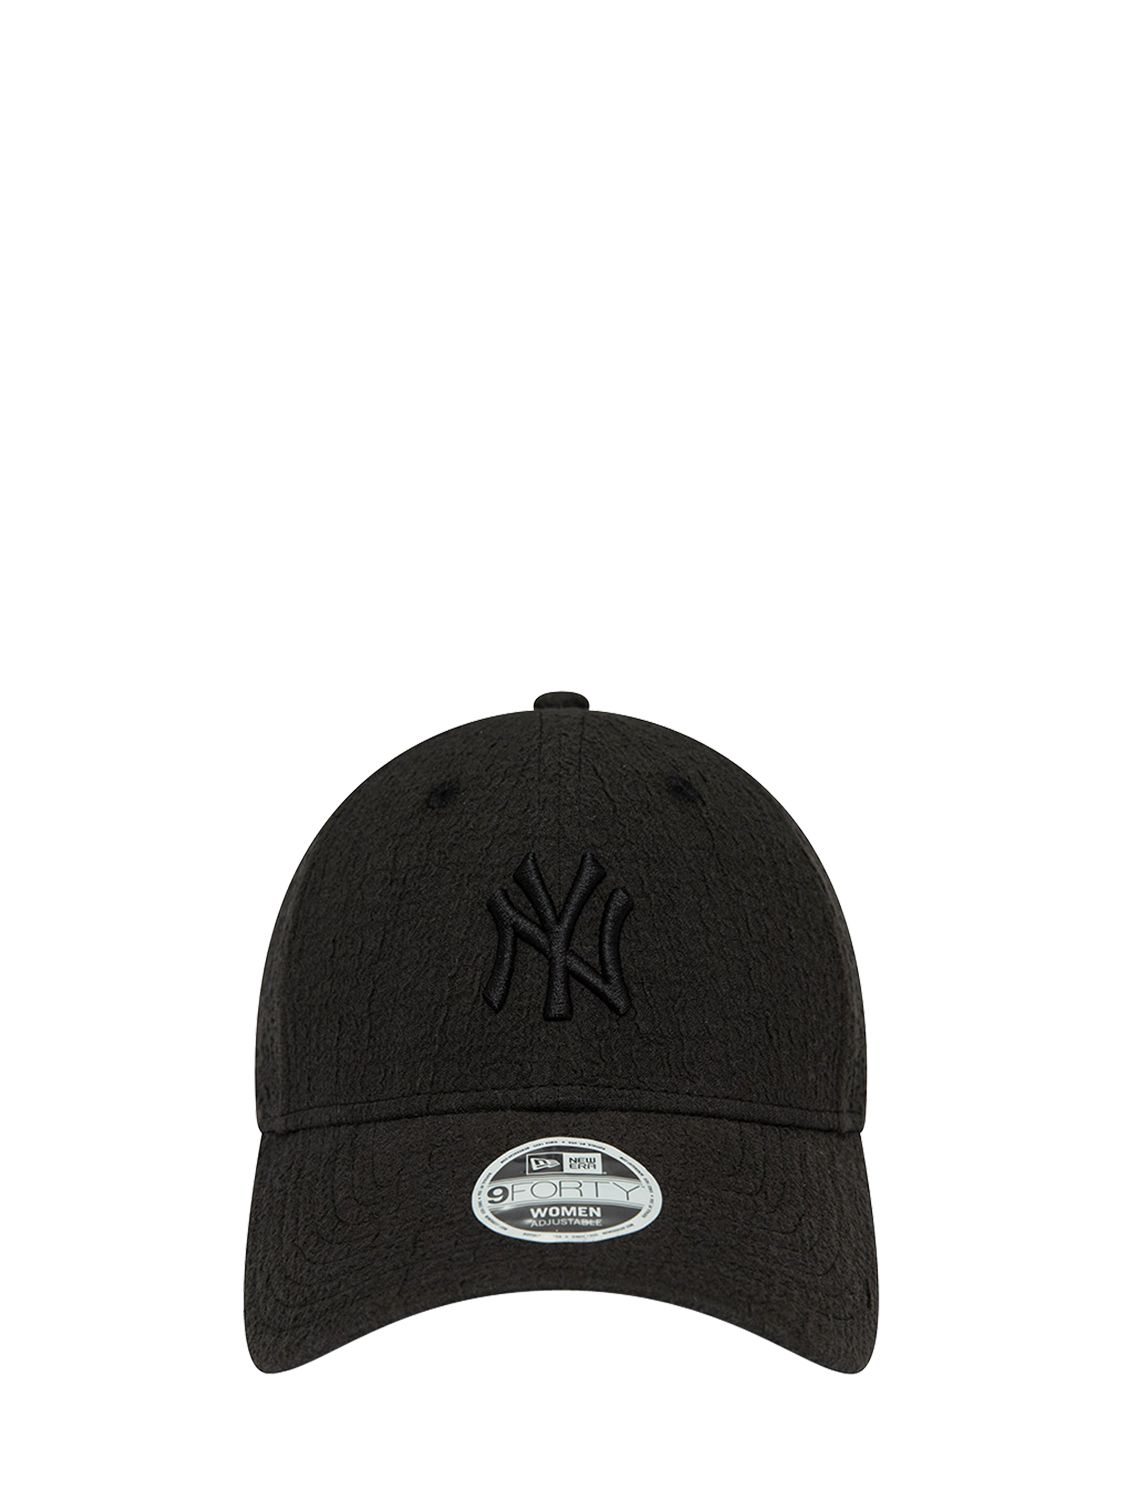 casquette ny yankees bubble stitch 9forty